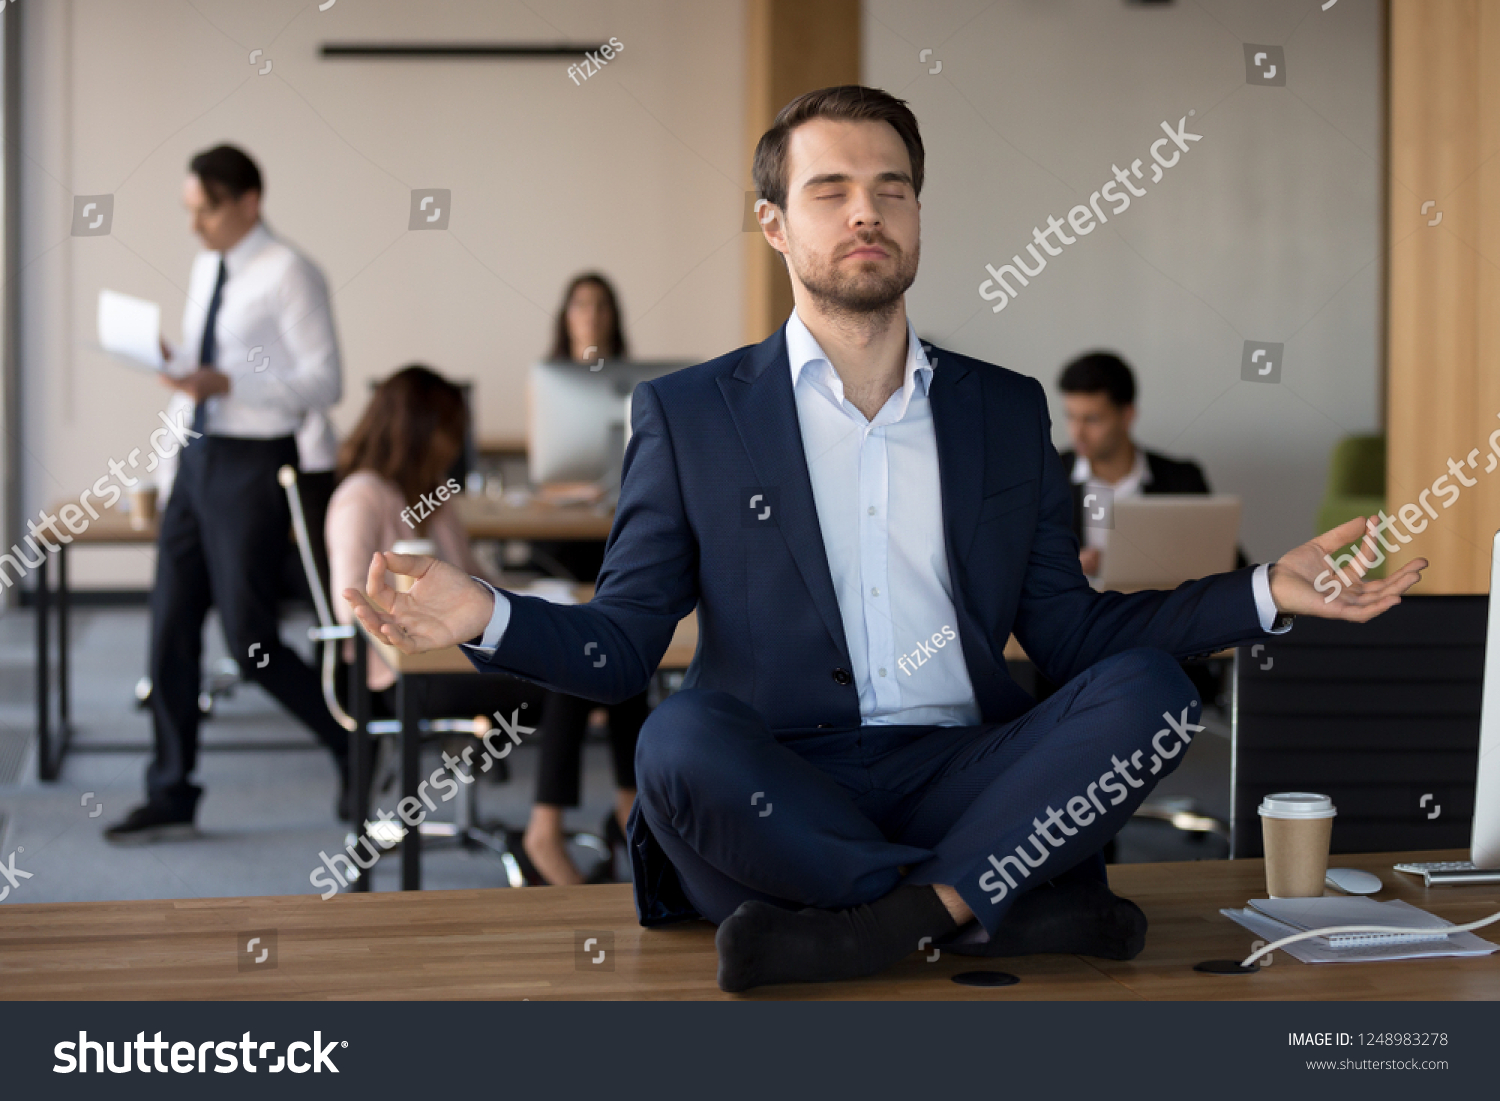 Business People working in coworking space, focus on millennial peaceful employee in formal suit sitting without shoes in lotus position on office desk practising meditation and visualization exercise #1248983278